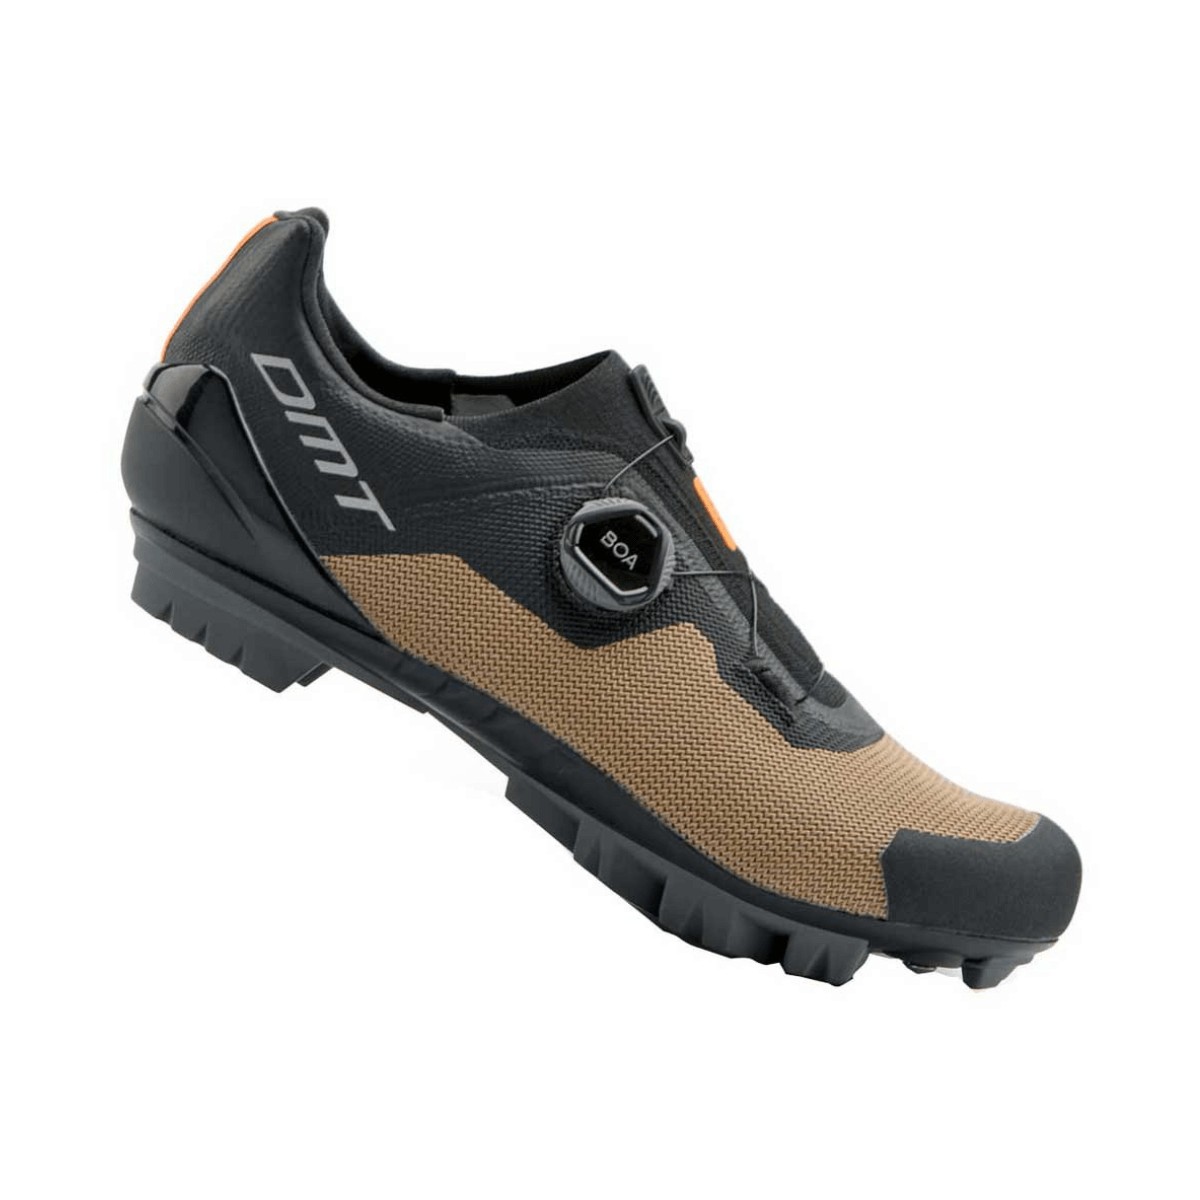 Chaussures DMT KM4 Bronze AW22, Taille 41 - EUR